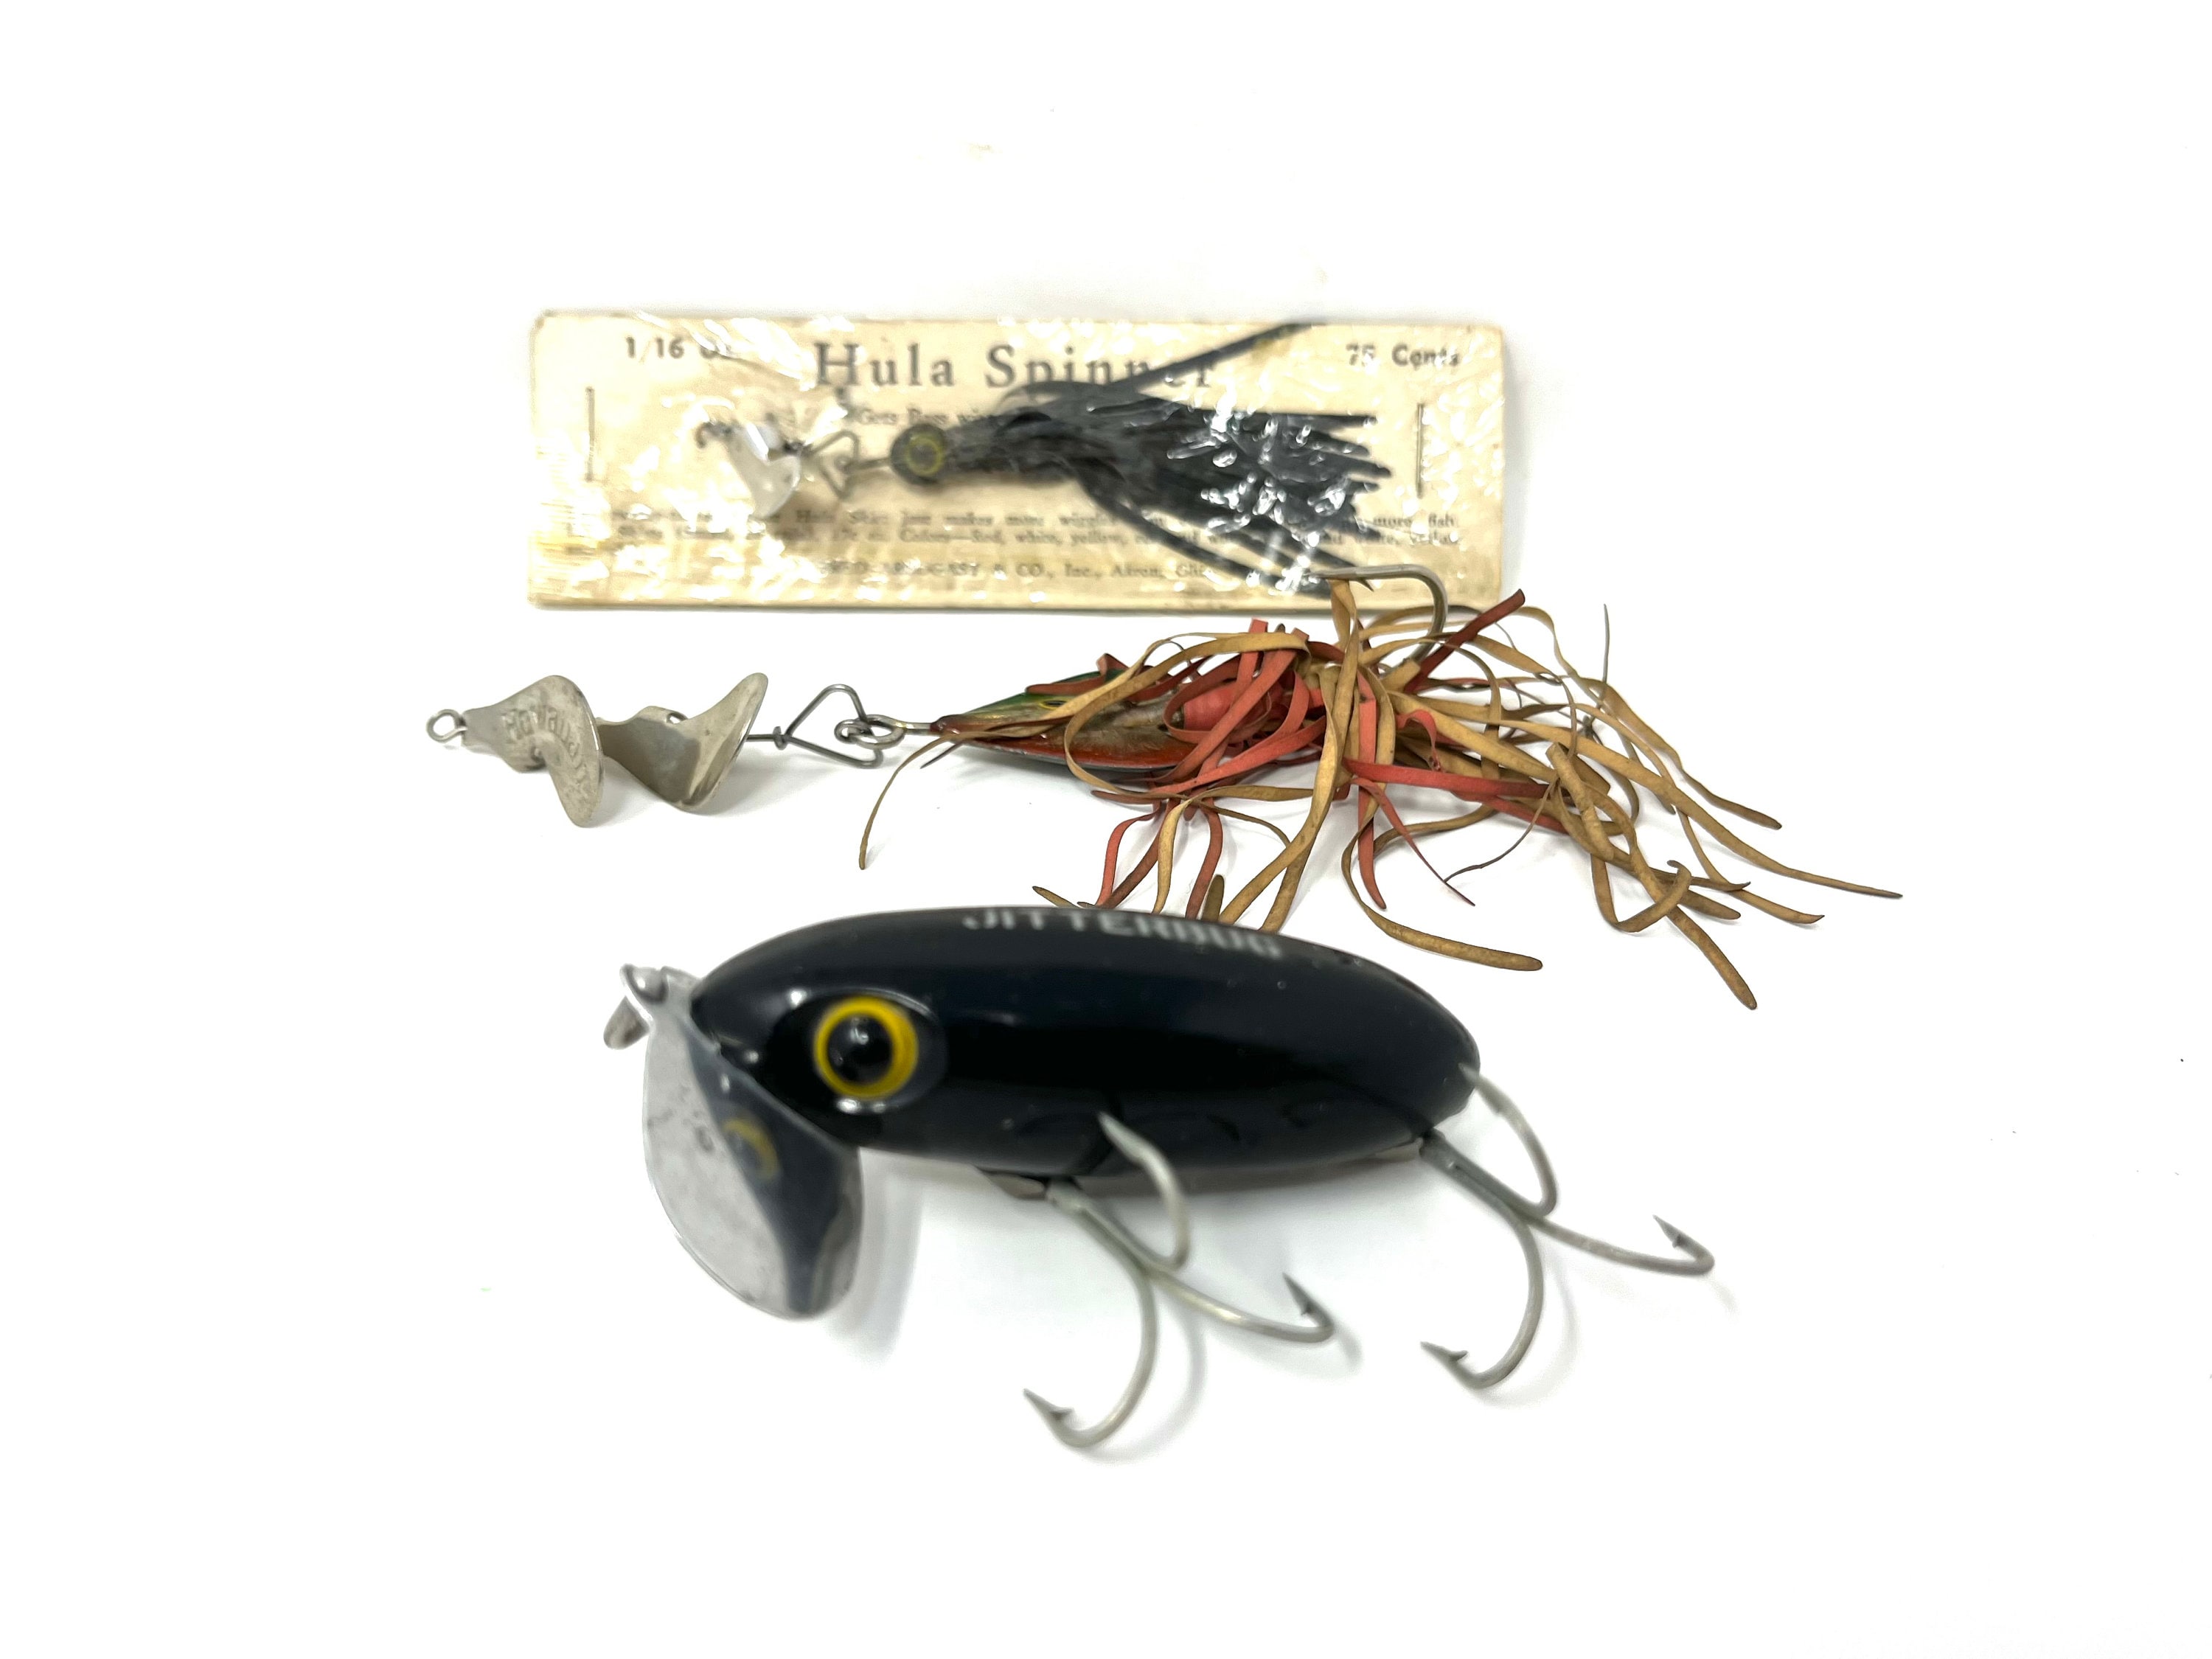 3 Vintage Fred Arbogast Fishing Lures Including 1 Scarce Hula Spinner New  on Card / Antique Fishing Lure Fred Arbogast 